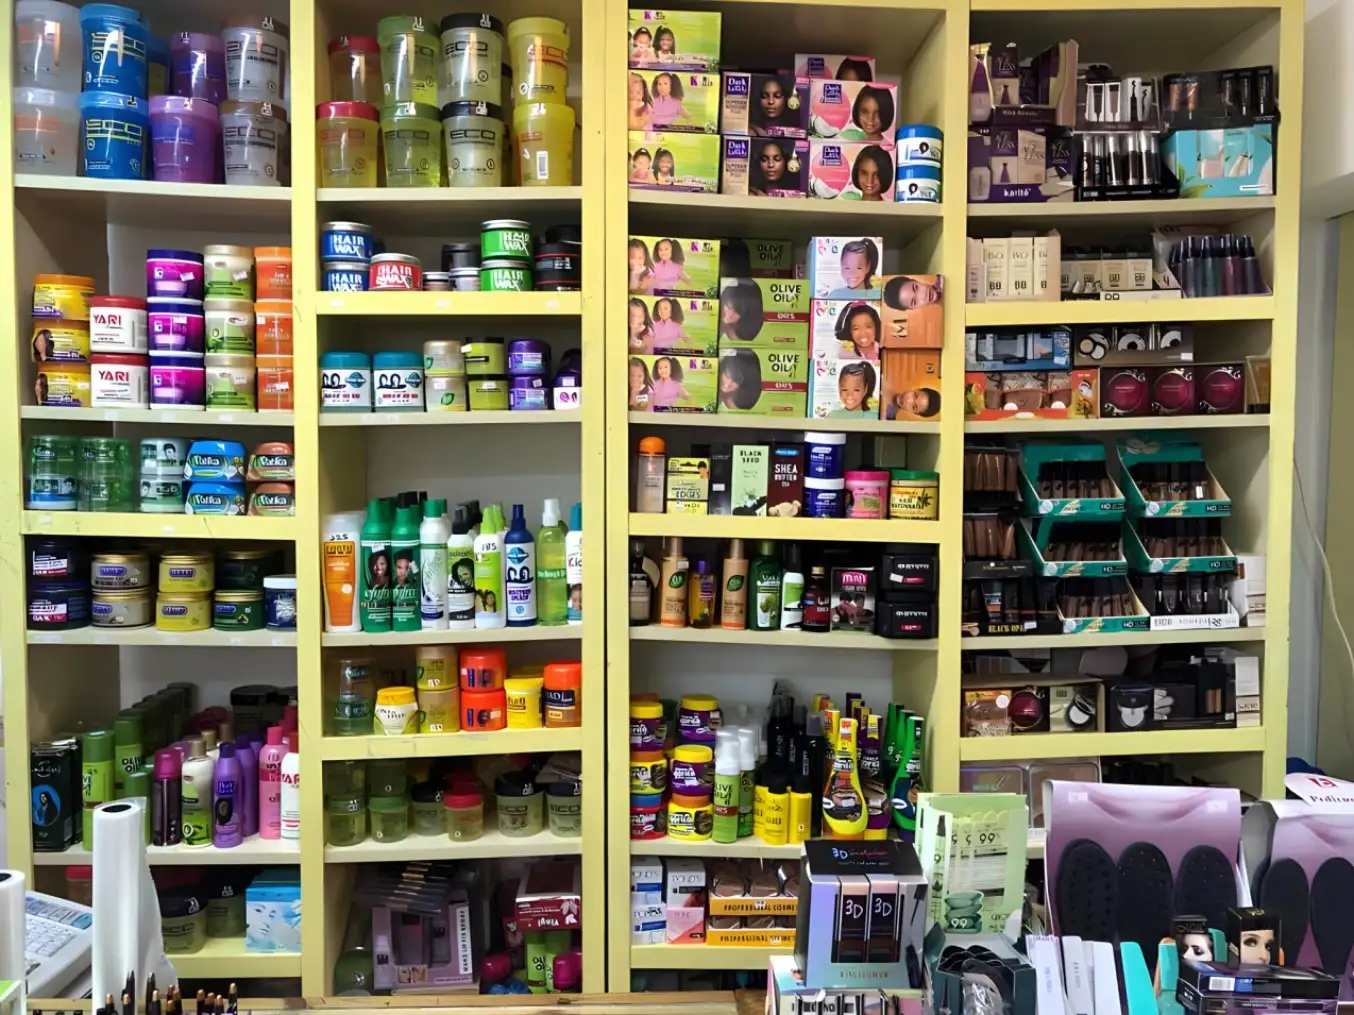 Are you on the lookout for an exceptional collection of cosmetics and beauty products that not only deliver remarkable results but also come at highly affordable prices? Your search ends here at Agape Imports.